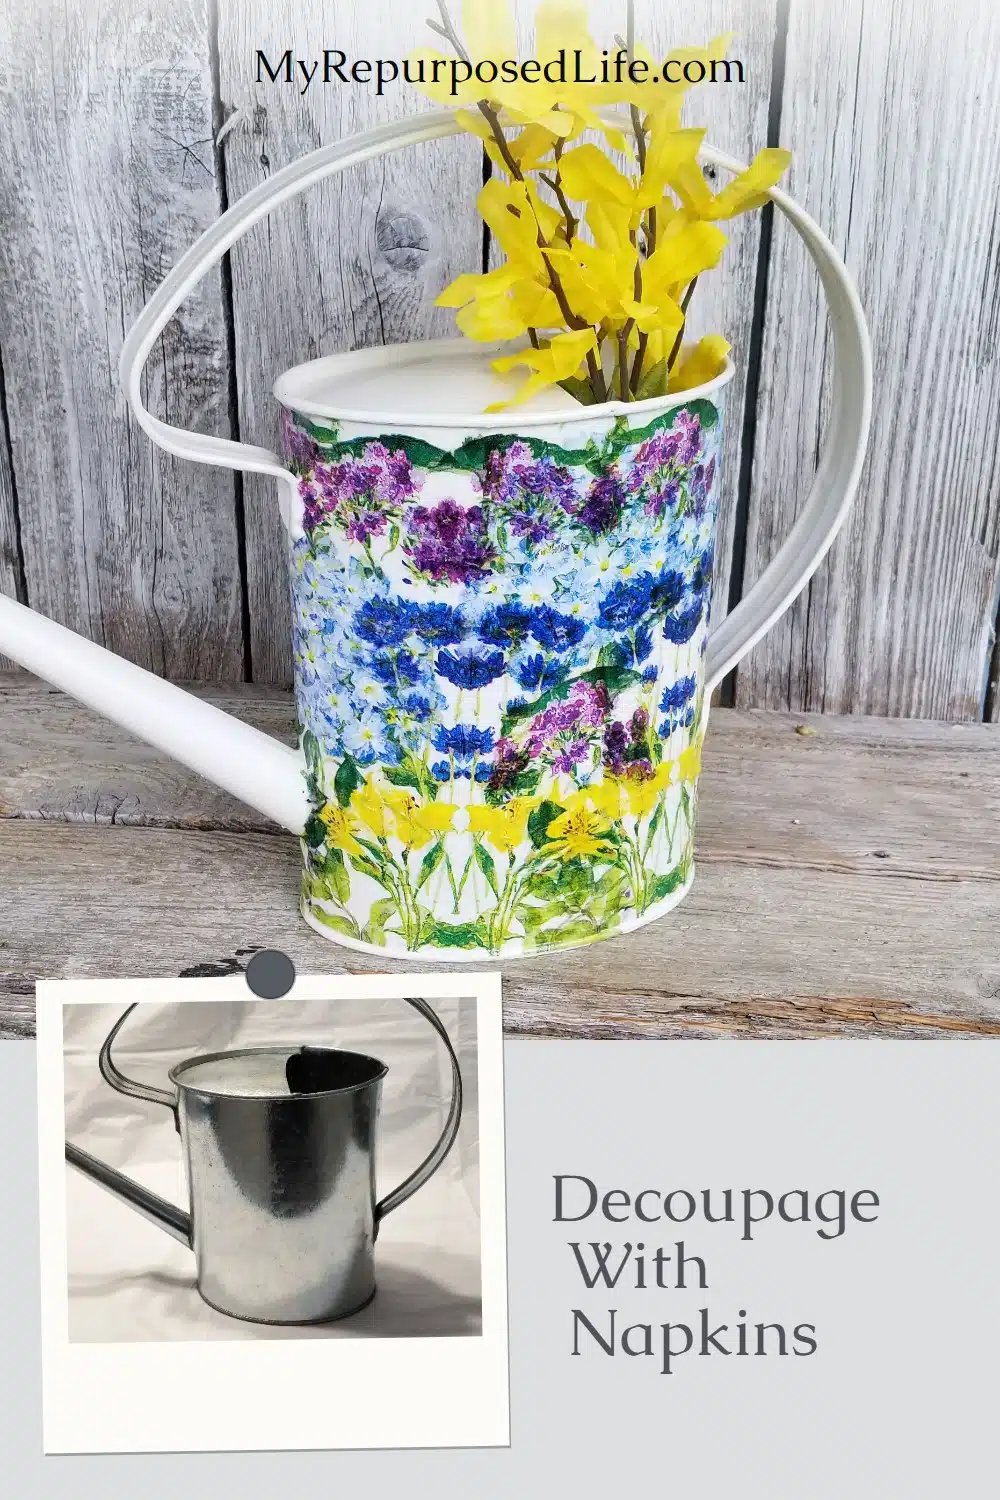 How to decoupage a watering can using pretty floral napkins. This easy craft can be done in just a couple of hours. Do more than one to make a set. Great for displaying cut flowers indoors. #MyRepurposedLife #repurposed #wateringcan #decoupage #craft via @repurposedlife